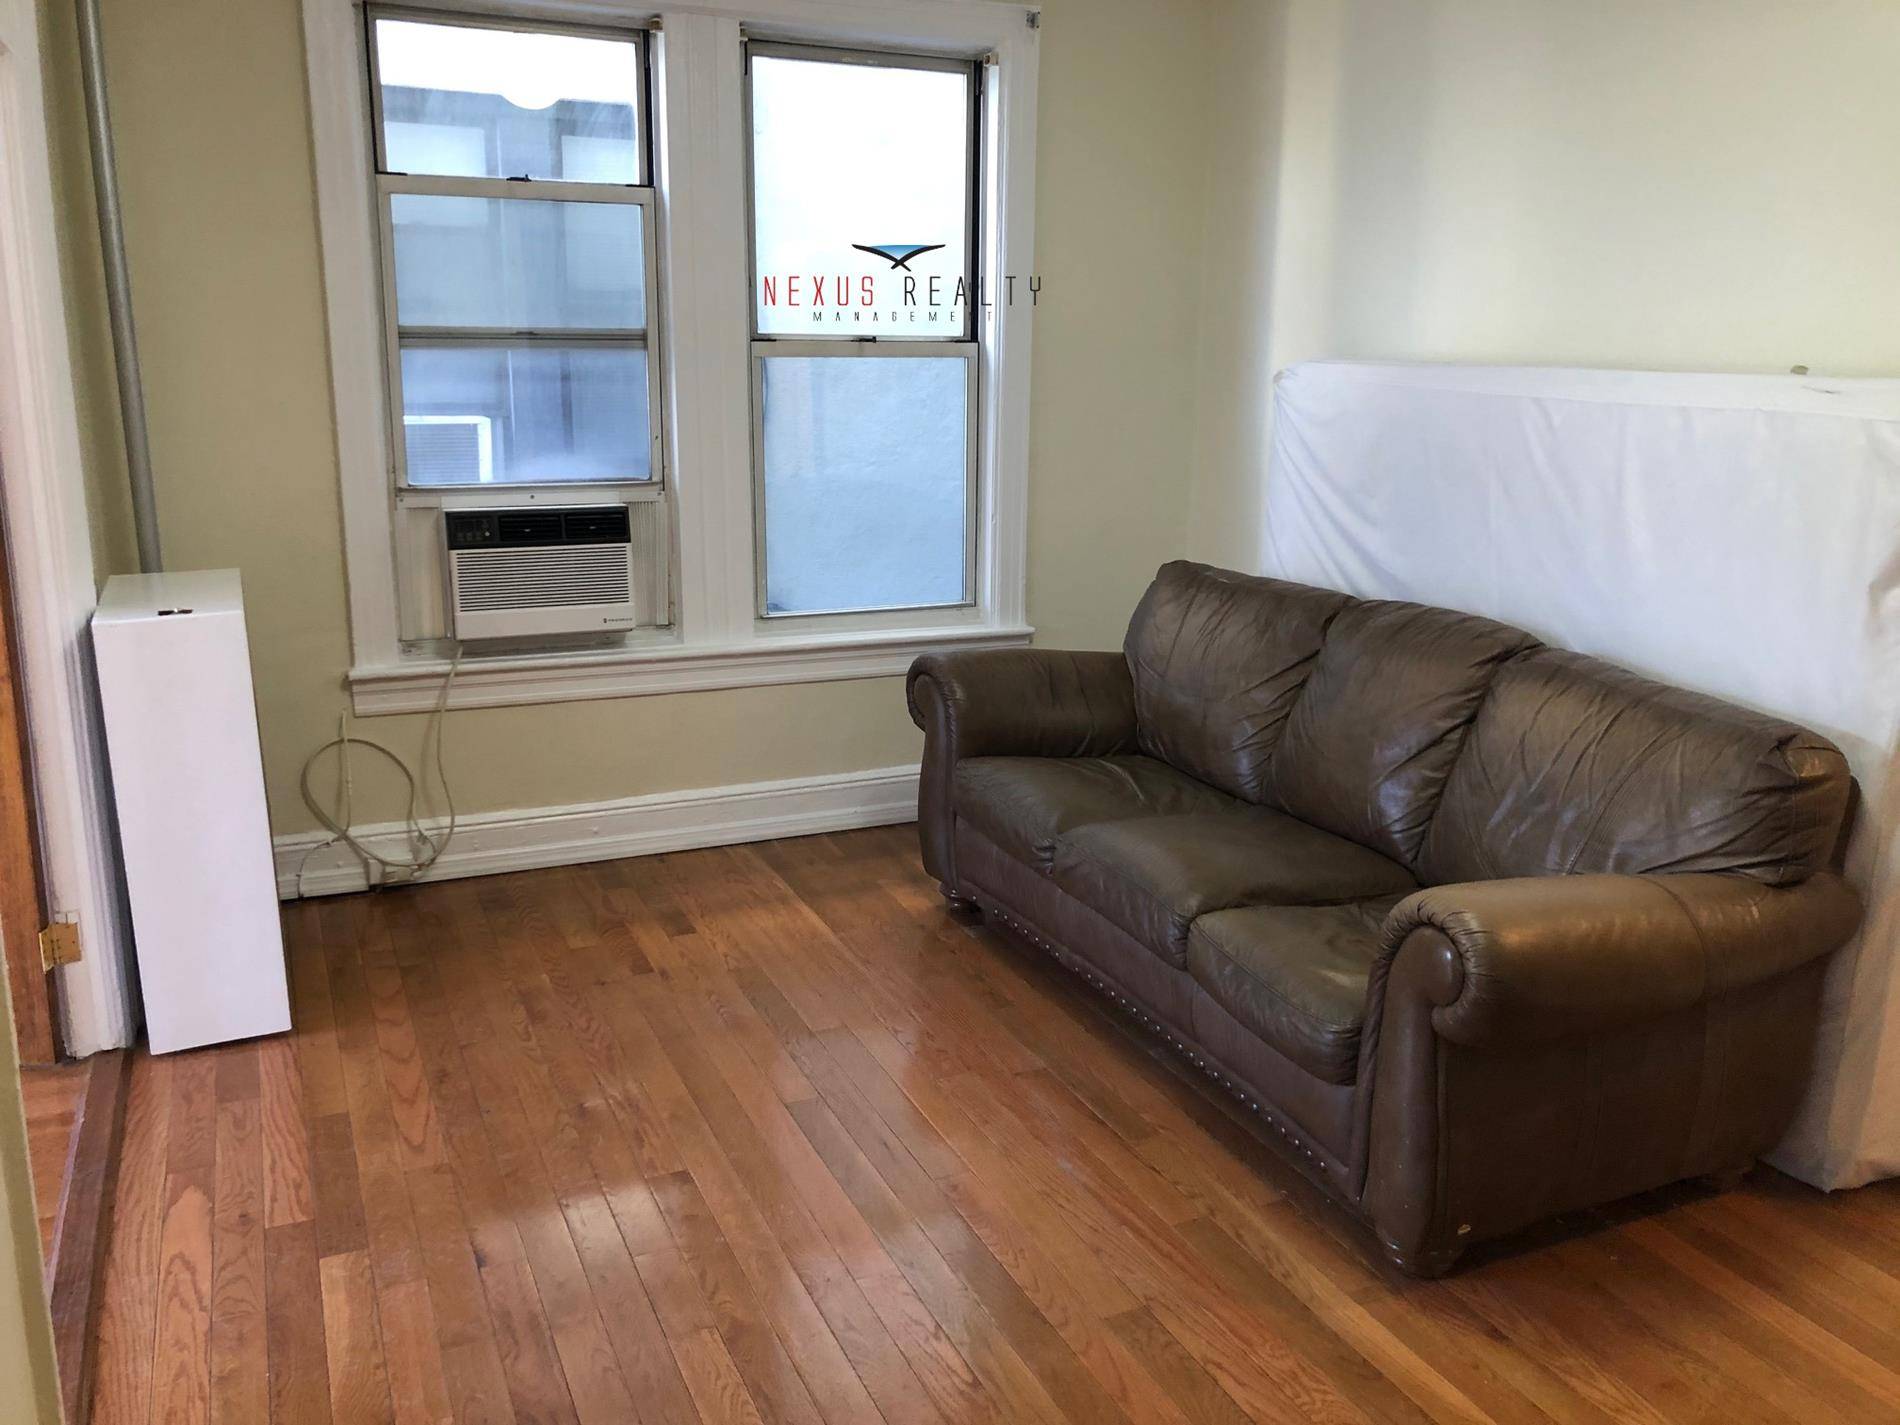 Beautiful 2 Bedroom apartment in Astoria 22501 King size bedroom and 1 queen size bedroom on the 1st floor in a 3 story walk up small buildingSpacious living roomNice and ...